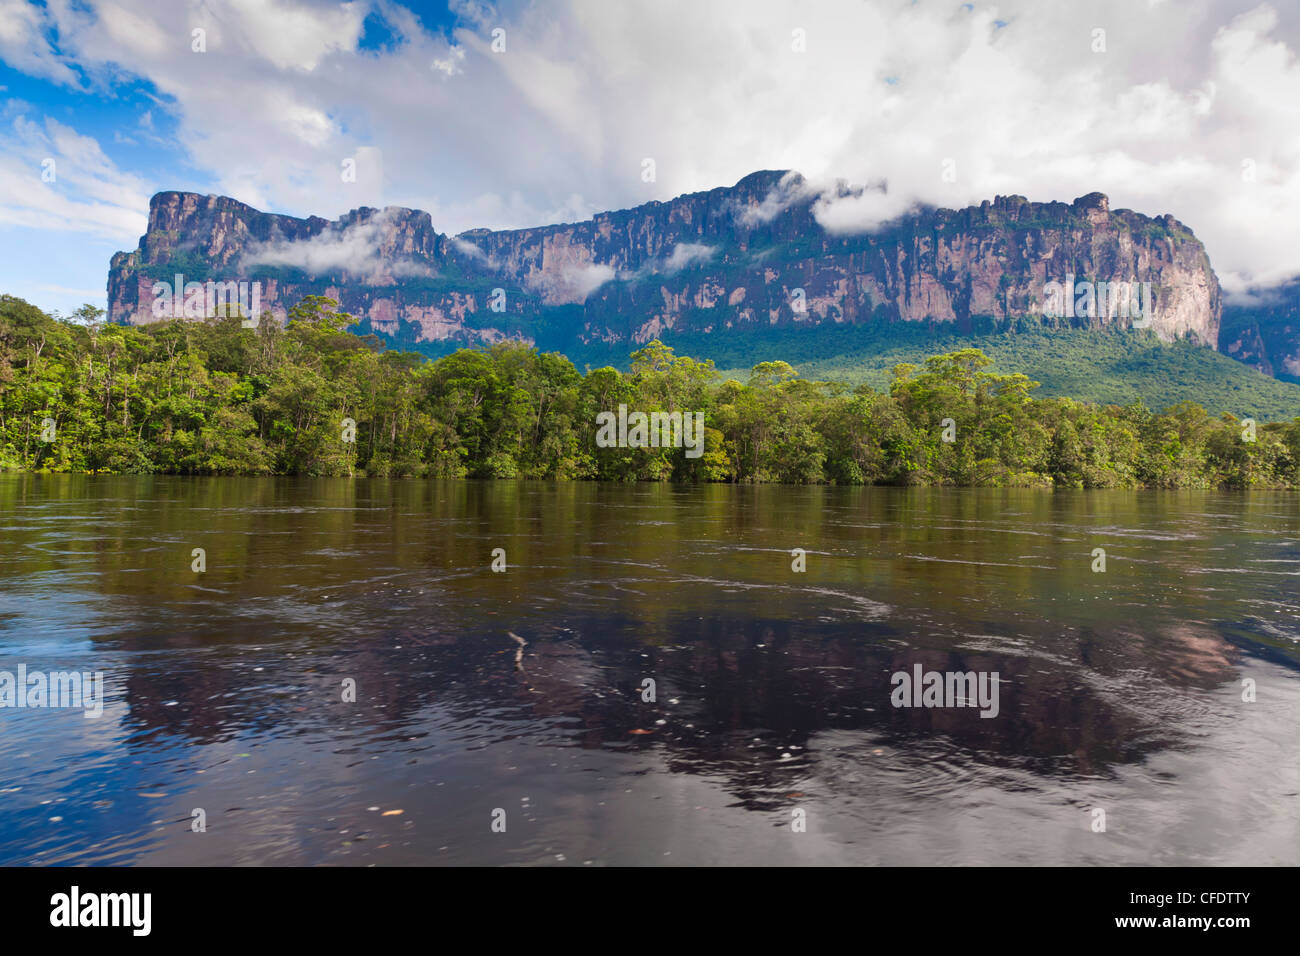 Scenery on boat trip to Angel Falls, Canaima National Park, Guayana Highlands, Venezuela, South America Stock Photo